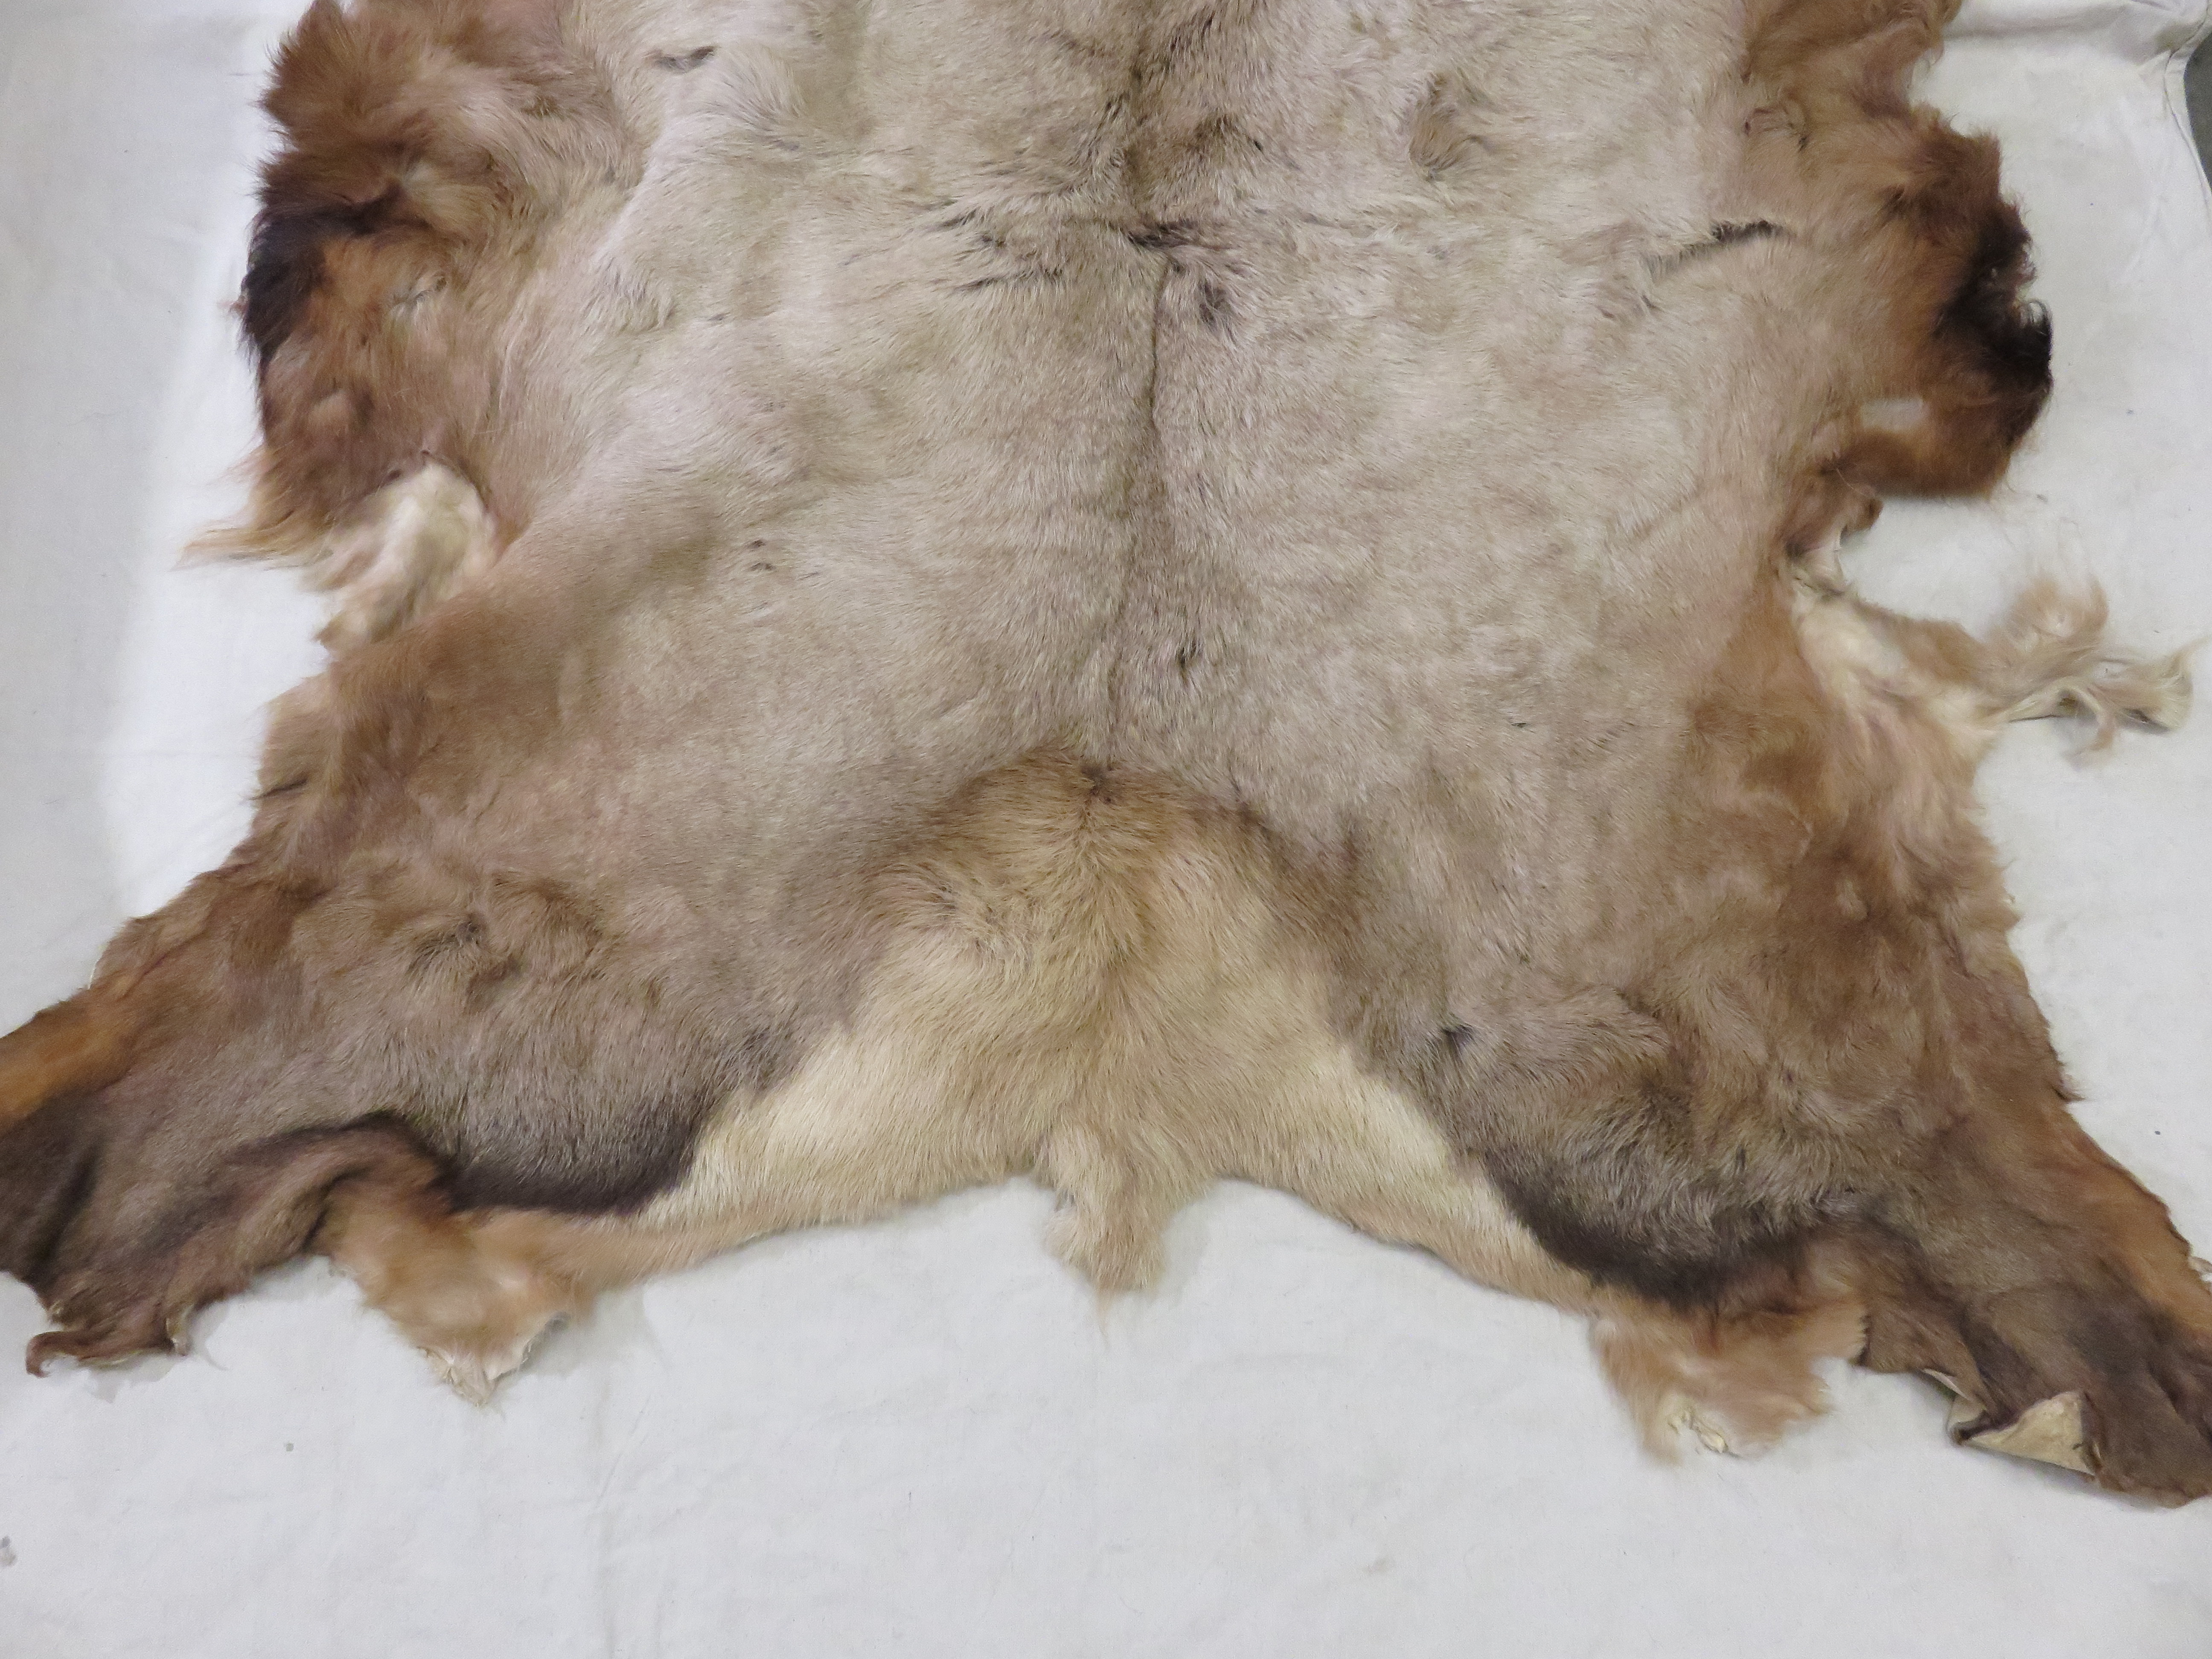 Elk Blanket Taxidermy Tanned Hide E, How To Skin An Elk For A Rug